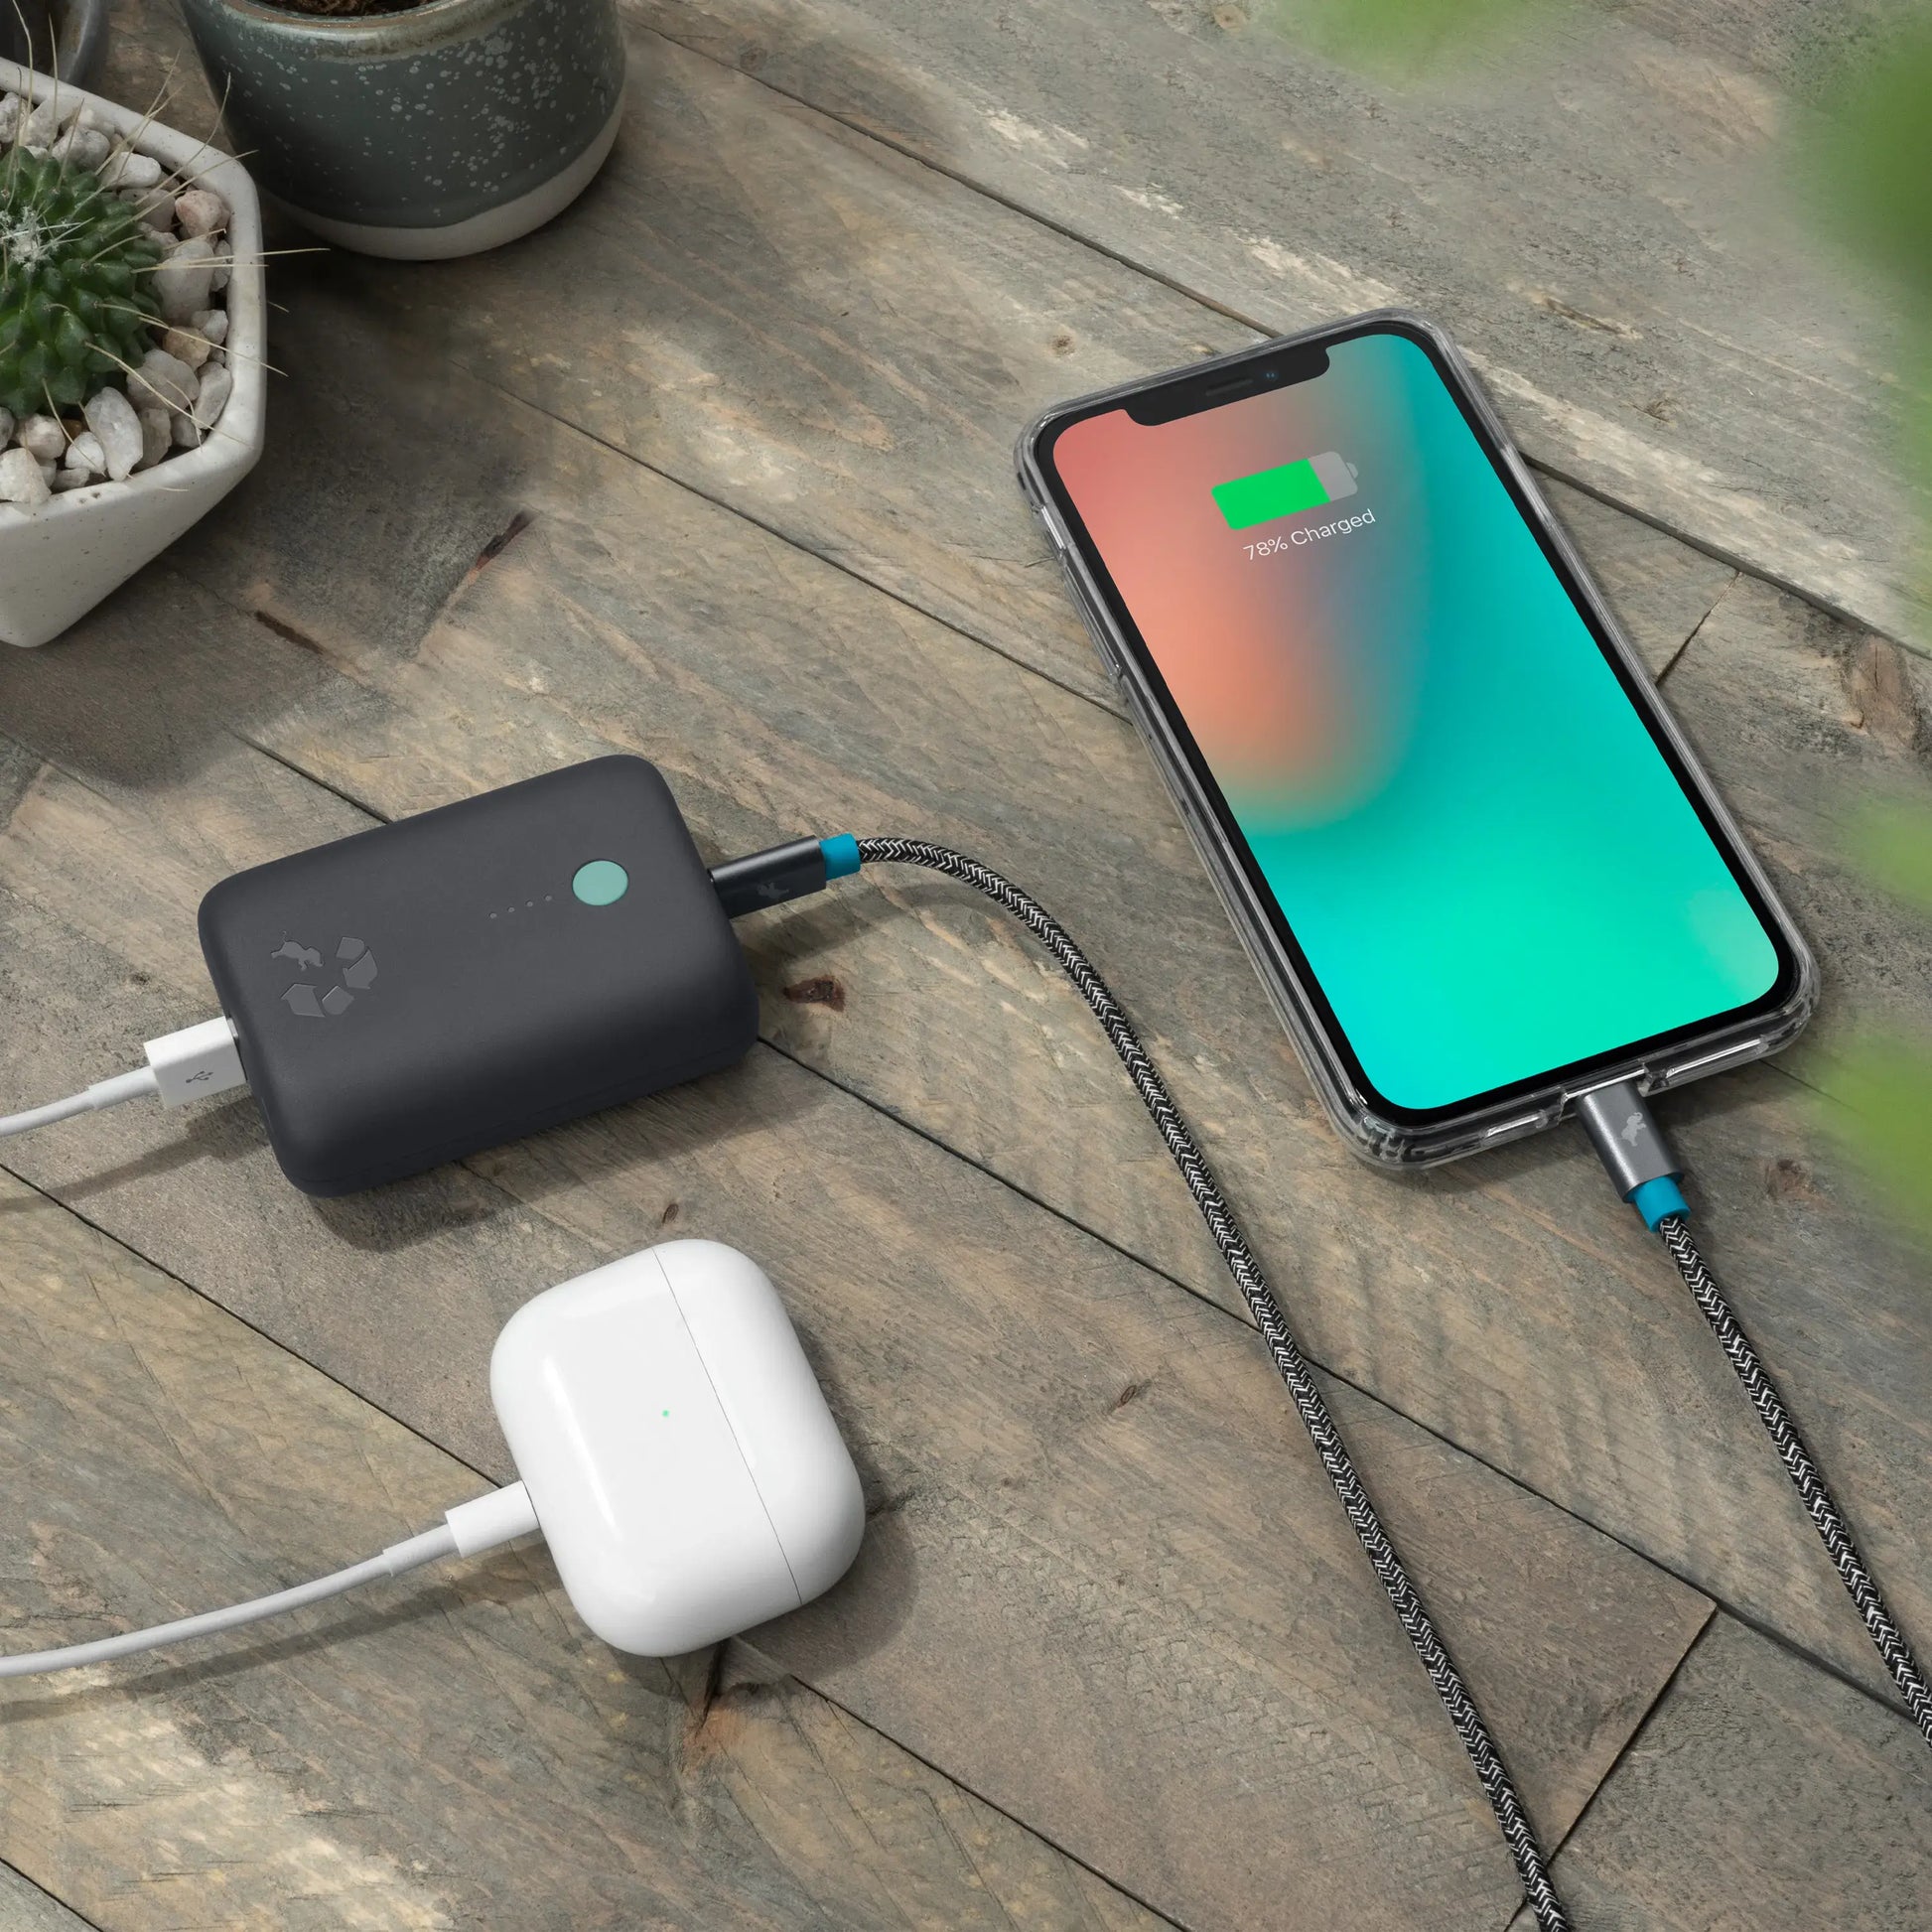 Charcoal portable charger with green button connected to airpods and cell phone on table.